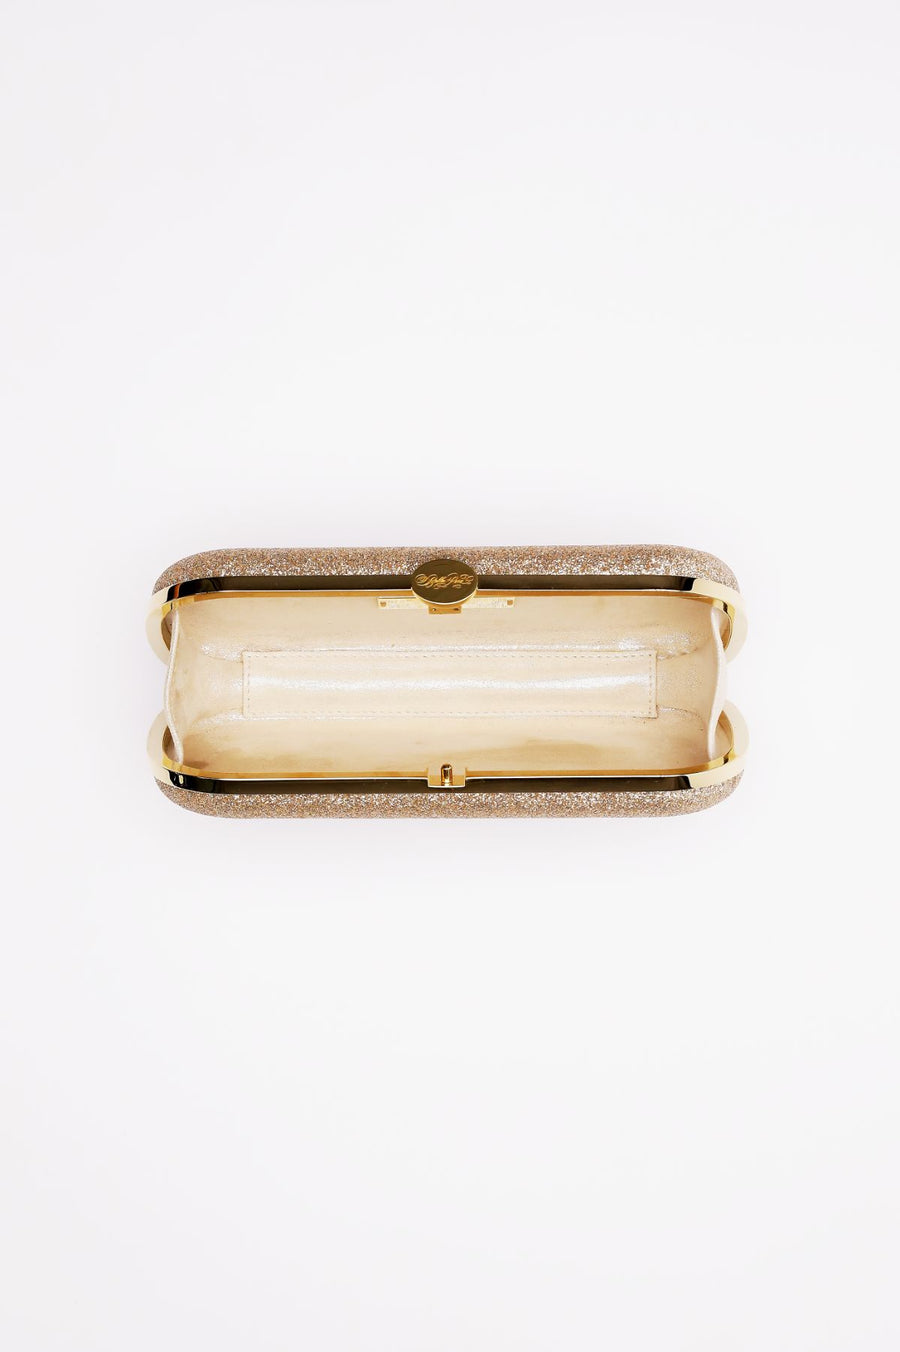 Top open view of Bella Clutch in Champagne shimmer with gold hardware frame.